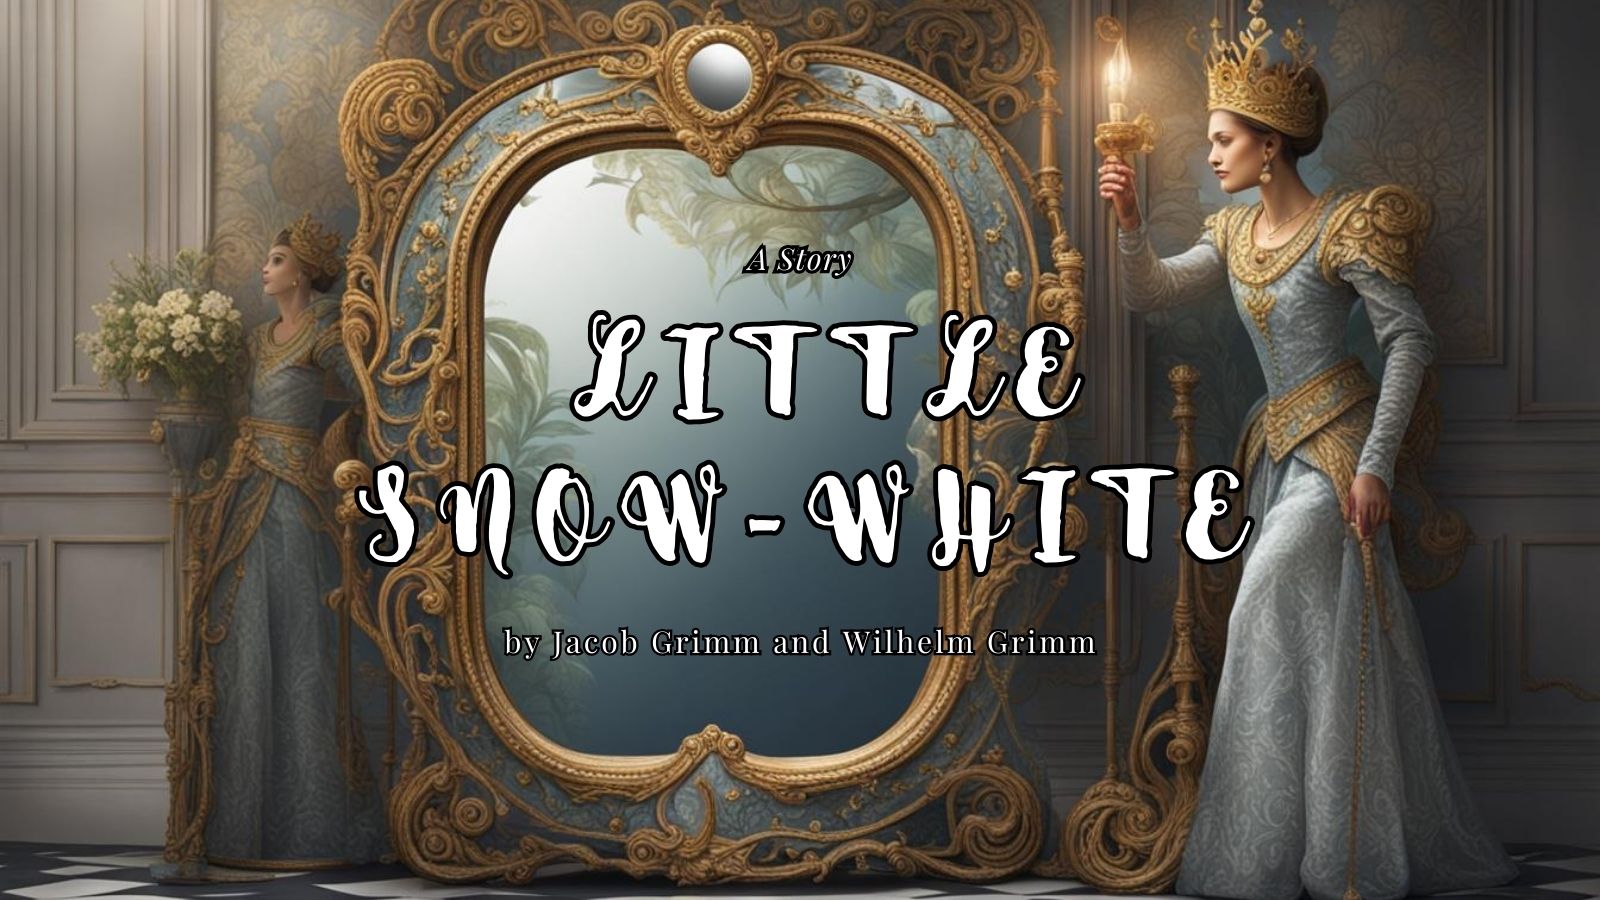 Little Snow-white by Jacob Grimm and Wilhelm Grimm